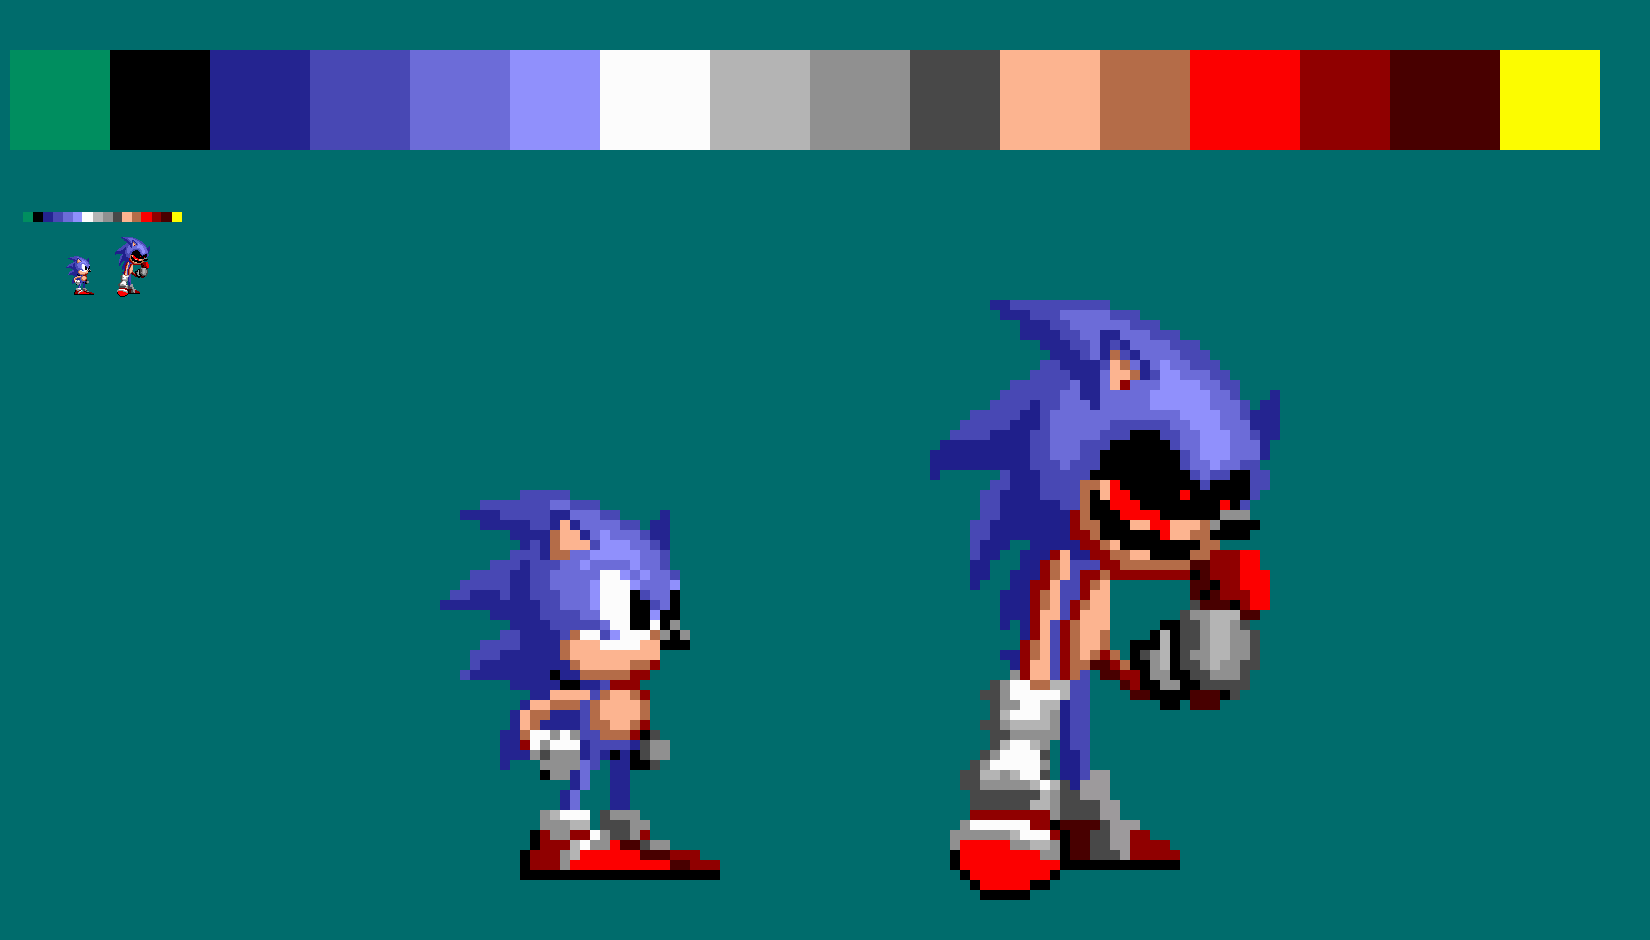 Angie's Sonic sprites/edits (UPDATE for 1.5) [Sonic the Hedgehog